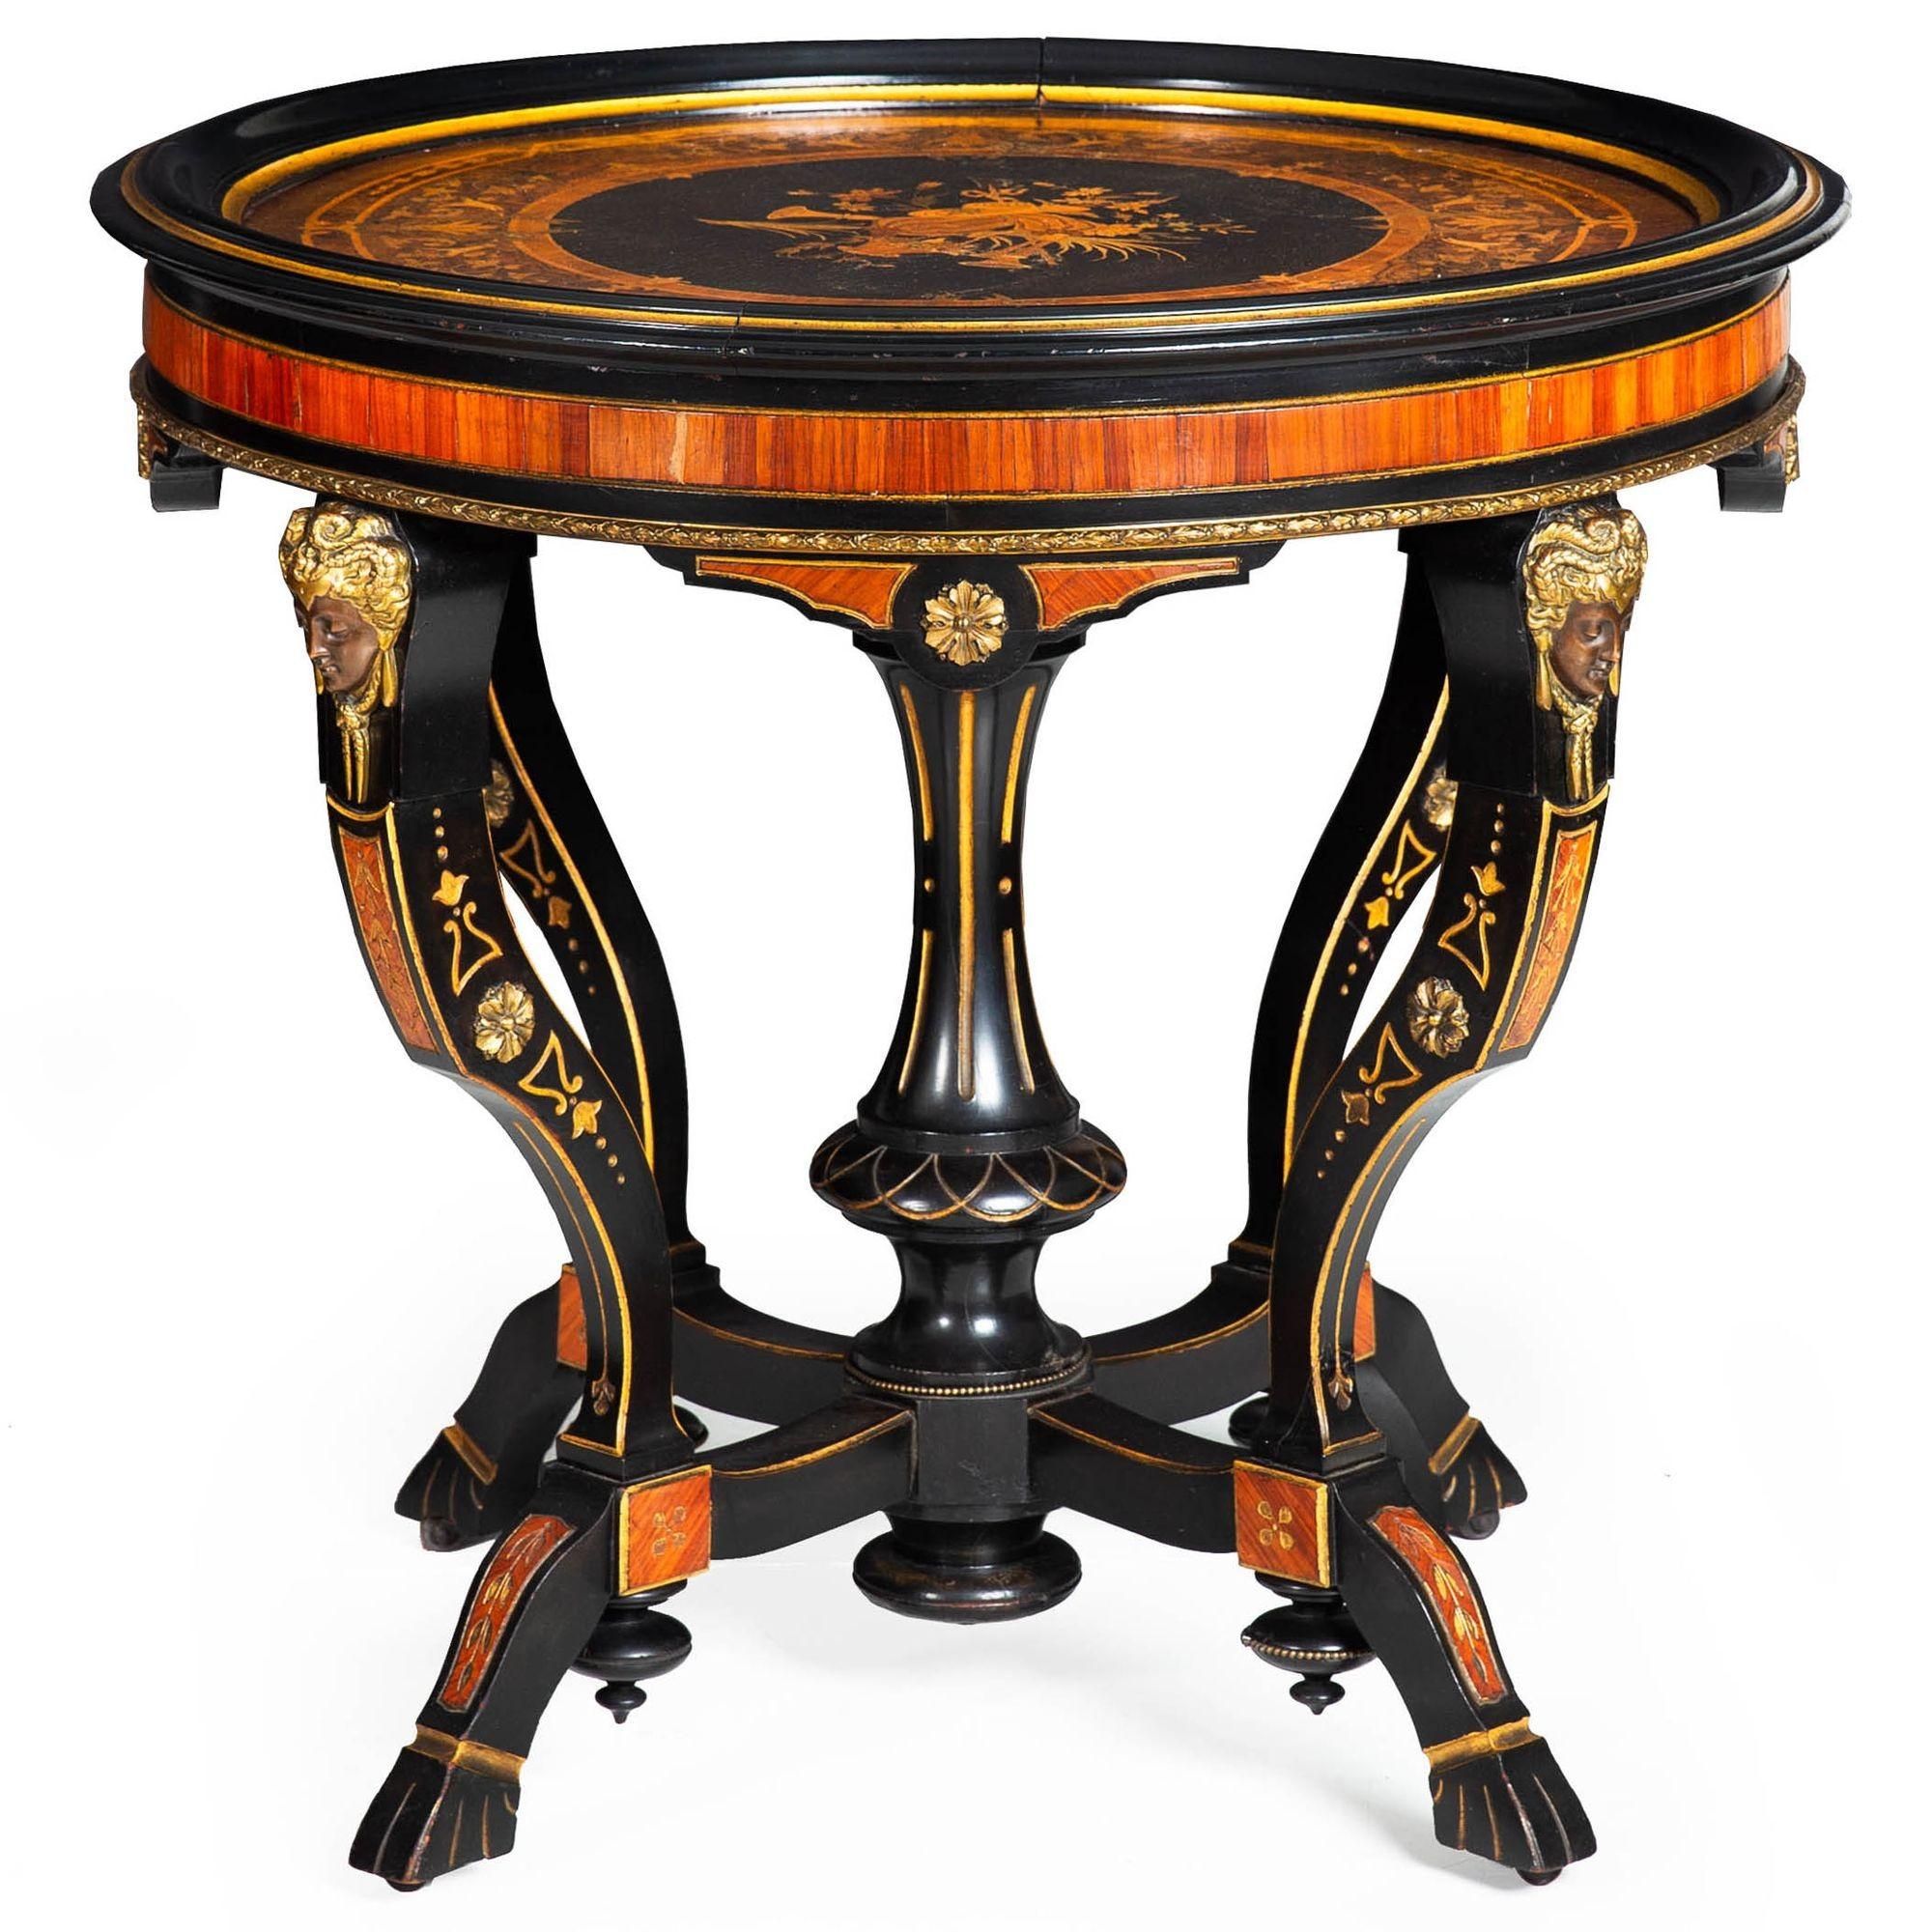 A RARE AESTHETIC MOVEMENT EBONIZED MARQUETRY-INLAID PARCEL GILT CENTER TABLE WITH BRONZE MASKS OF DIANA OF ANET
In the manner of Pottier & Stymus of New York  unmarked  ca. 1870
Item # 402NOP08A 

An elegant low table of the Aesthetic Movement circa